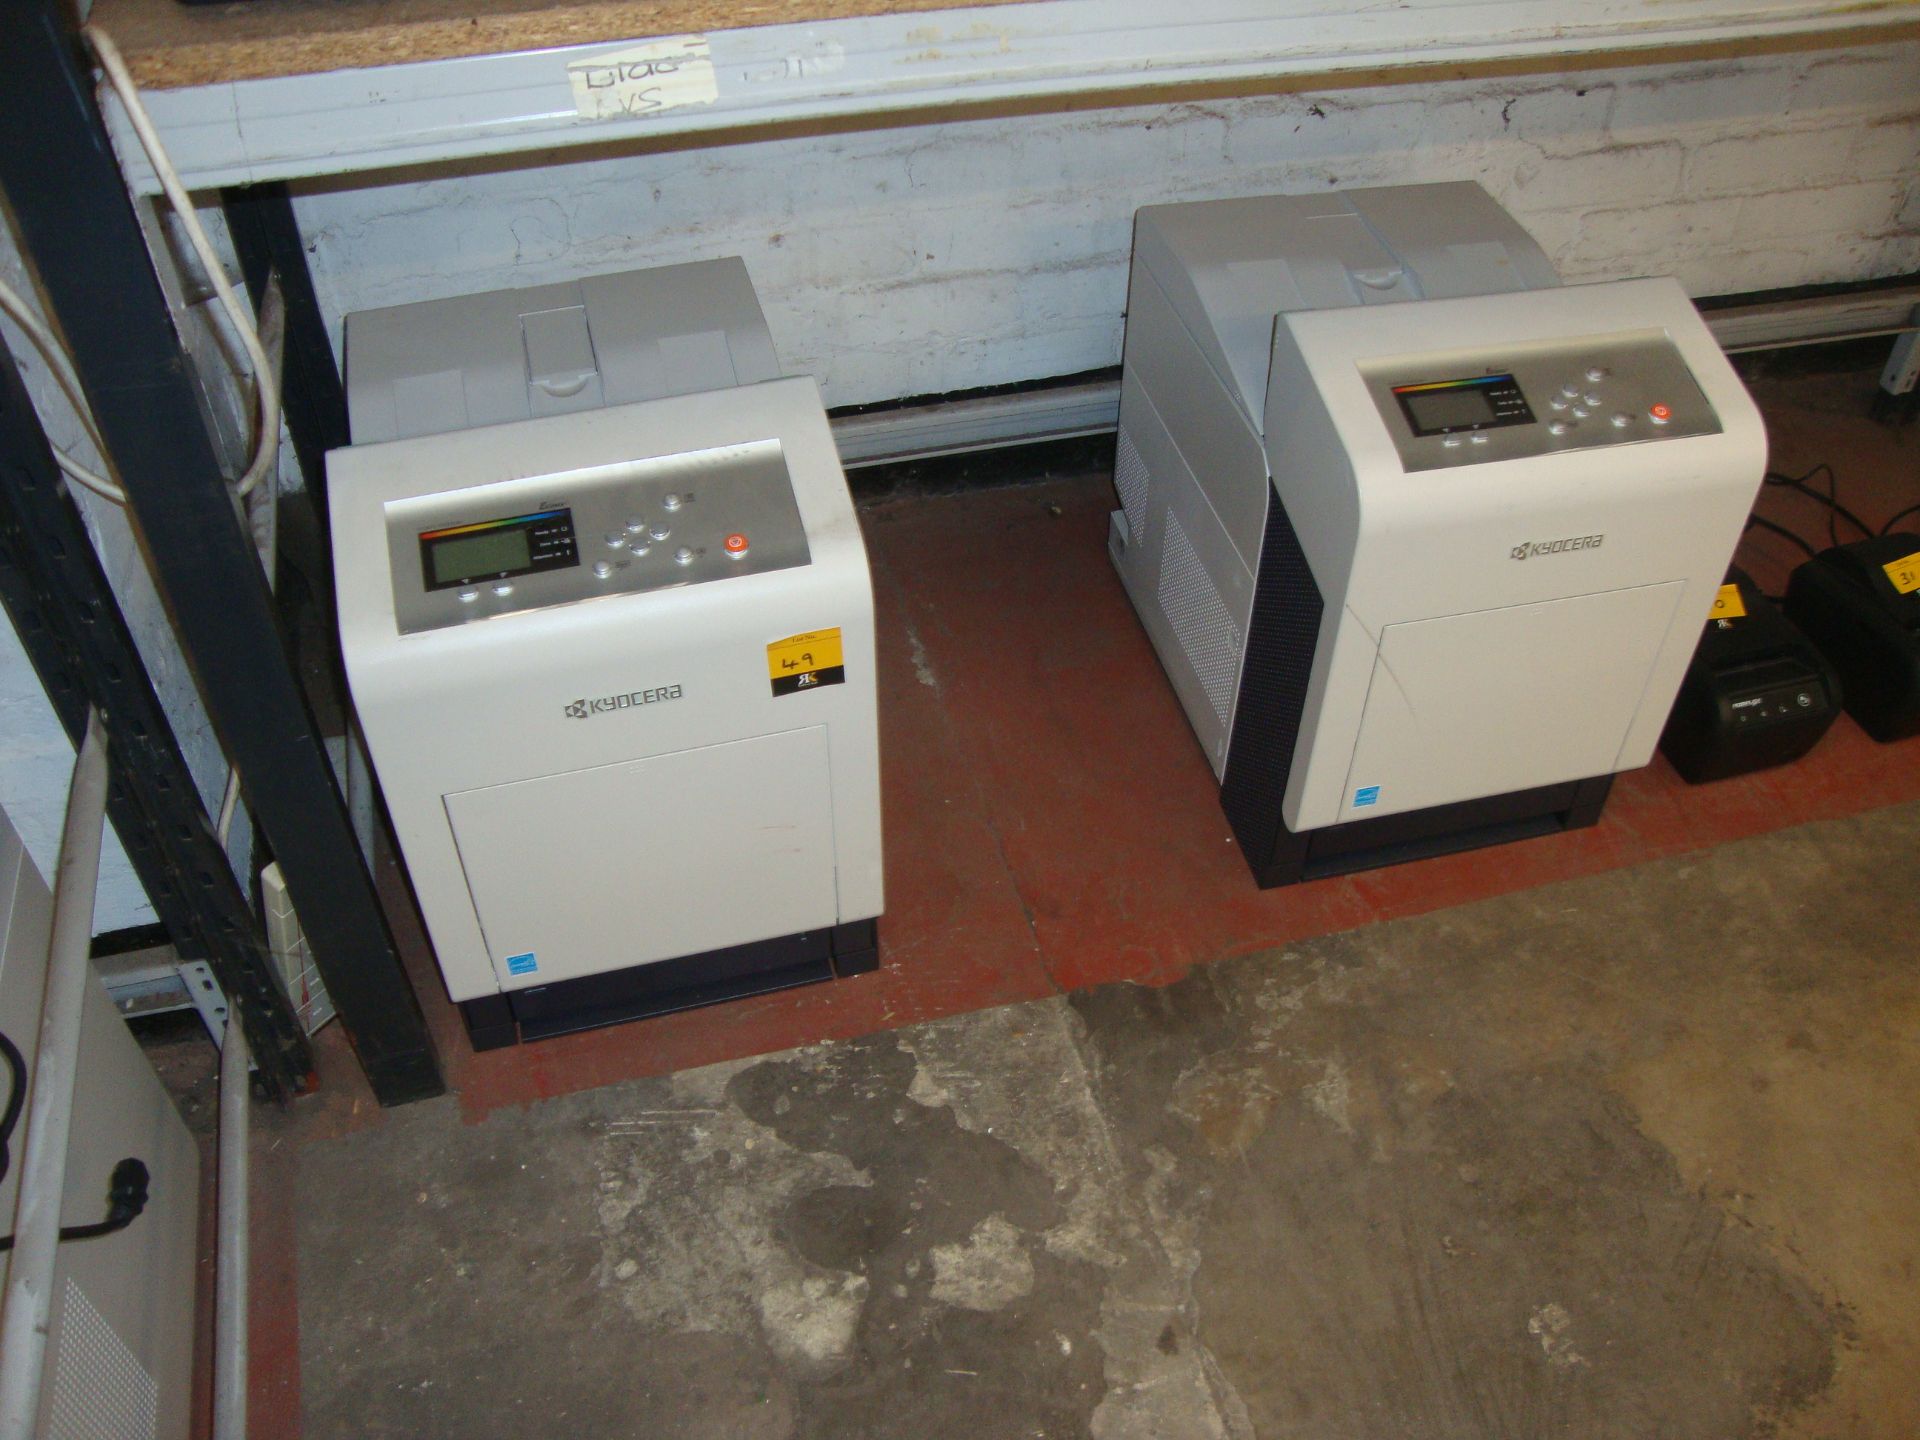 2 off Kyocera model FS-C5400DN 35 page per minute colour laser printers. Up to 9,600 DPI printing